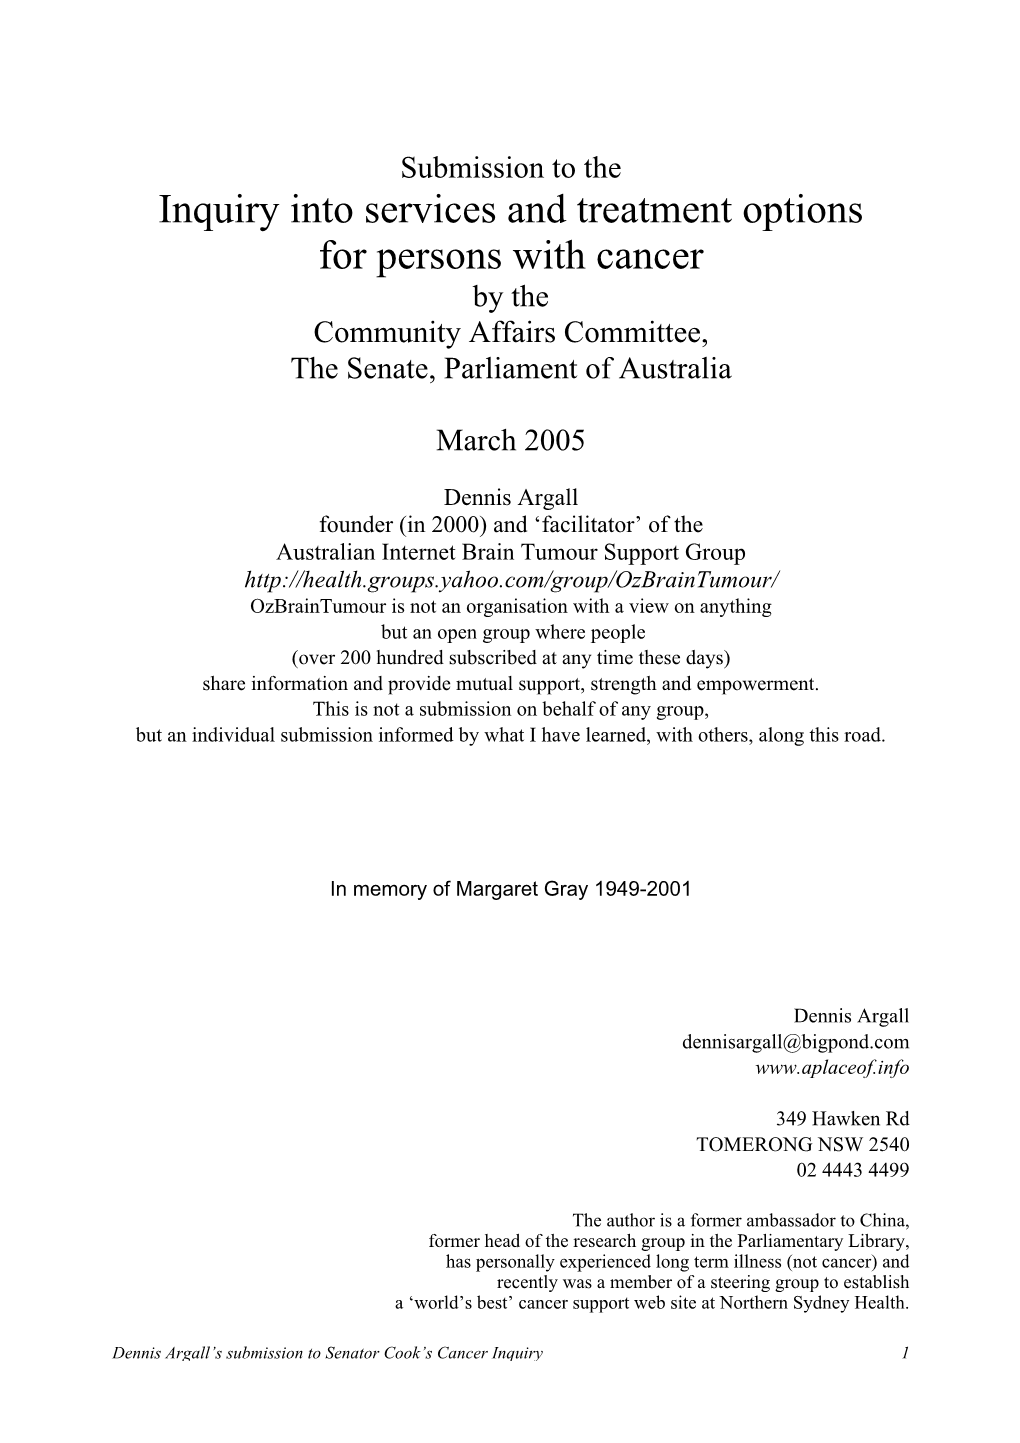 Submission to the Inquiry Into Services and Treatment Options for Persons with Cancer by the Community Affairs Committee, the Senate, Parliament of Australia